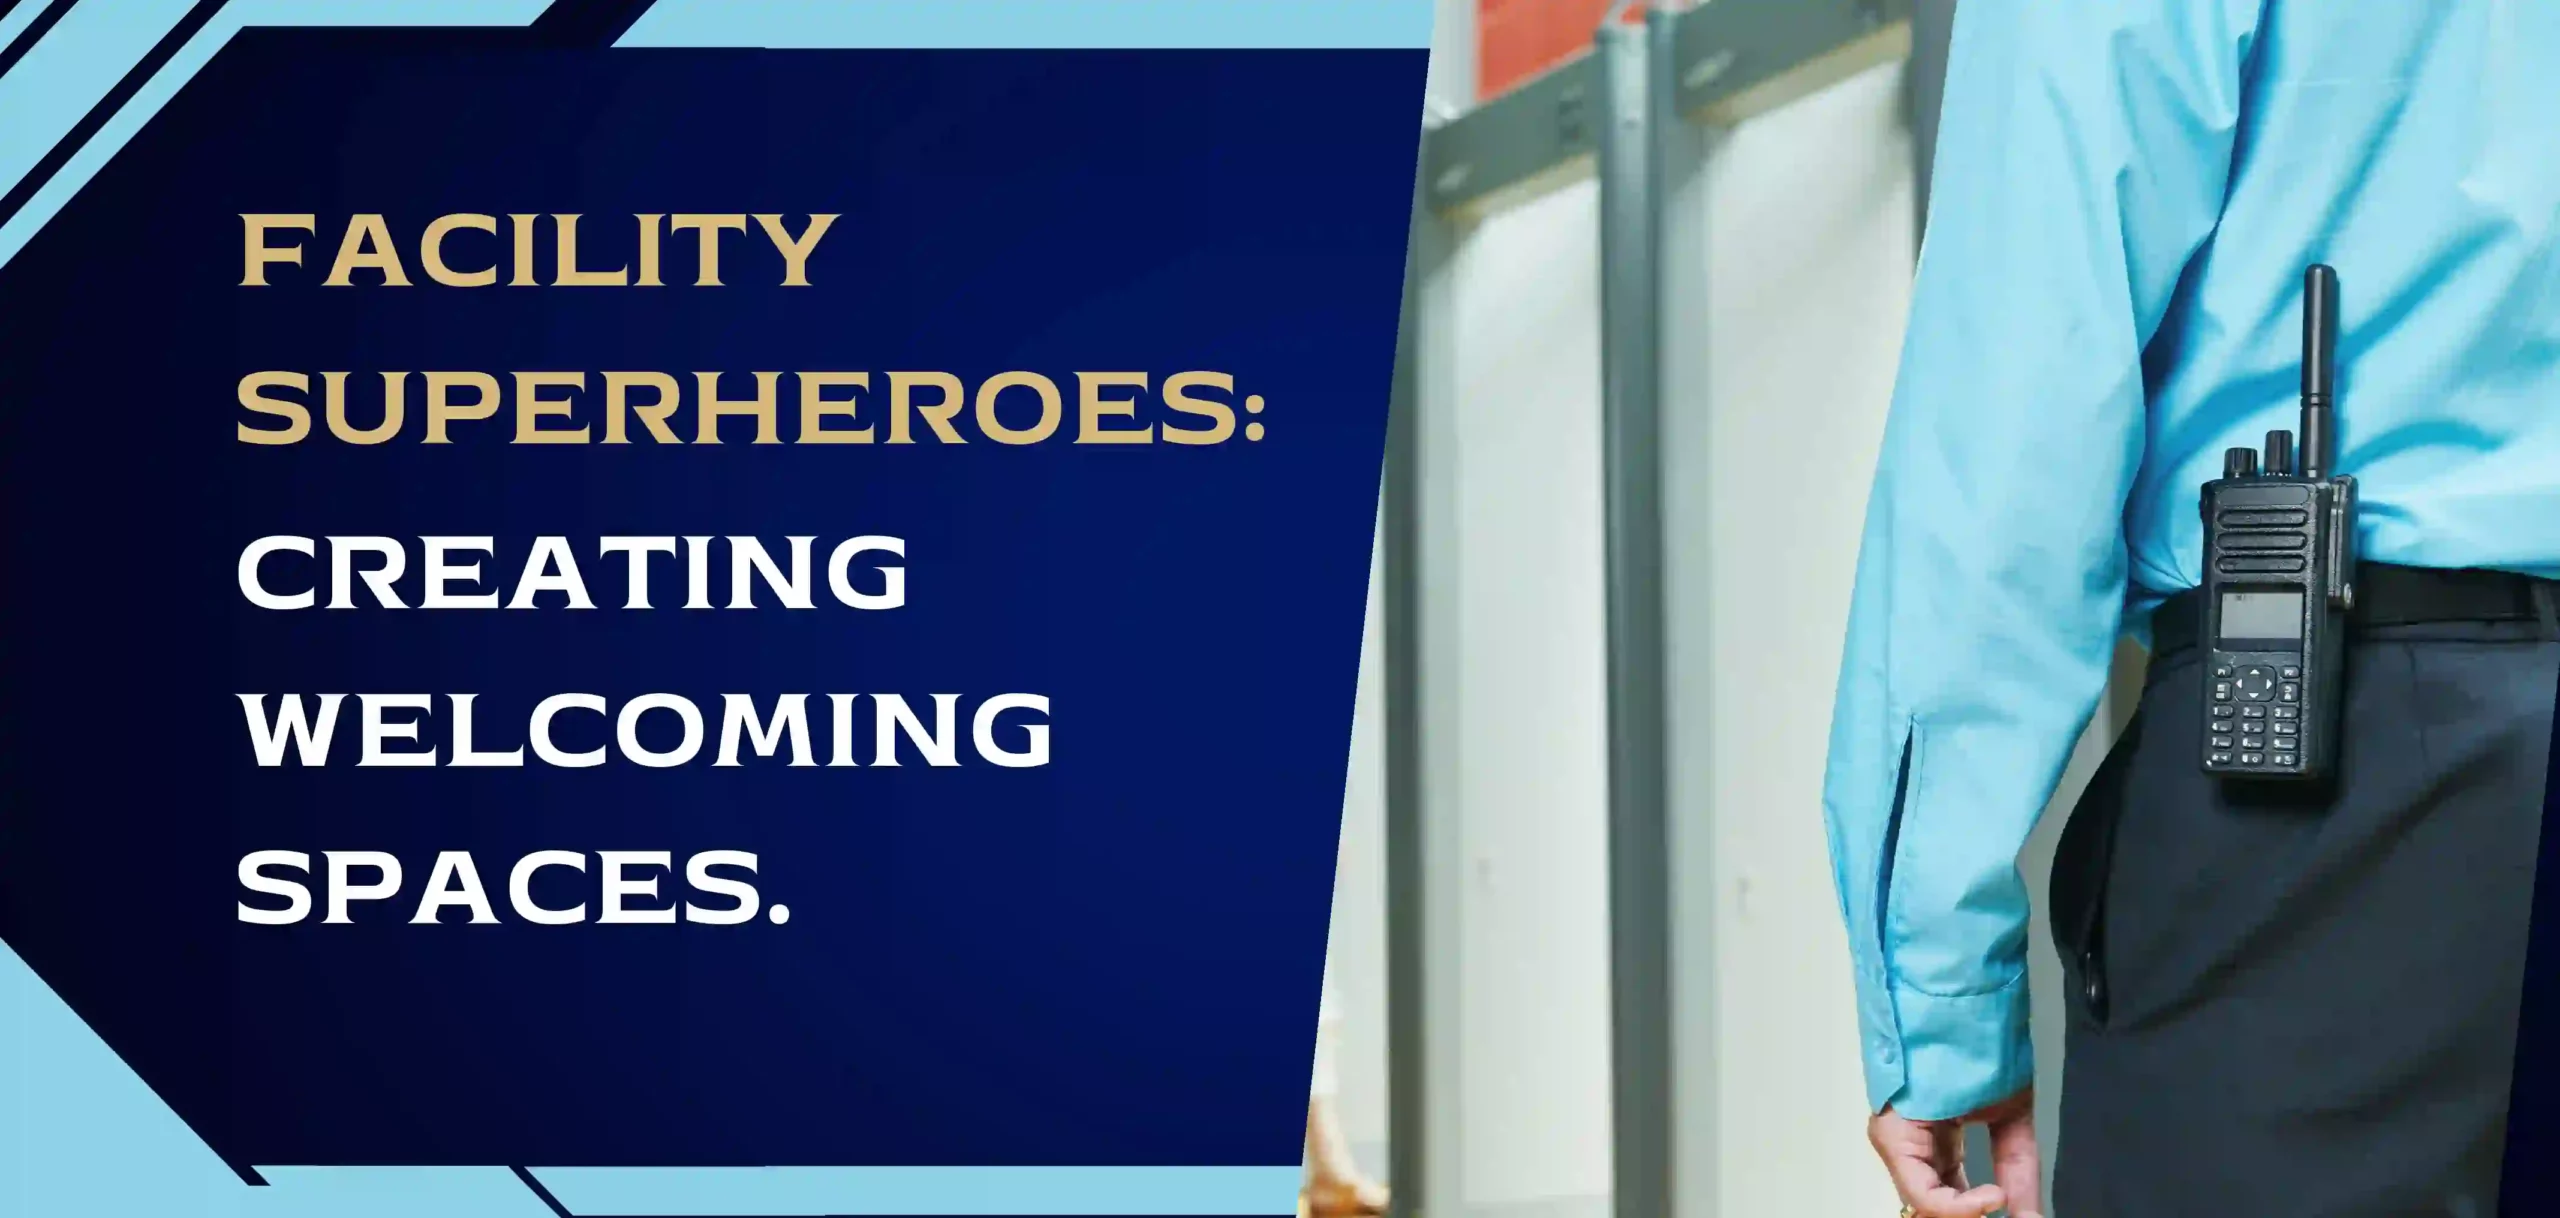 Facility Superheroes Creating Welcoming Spaces